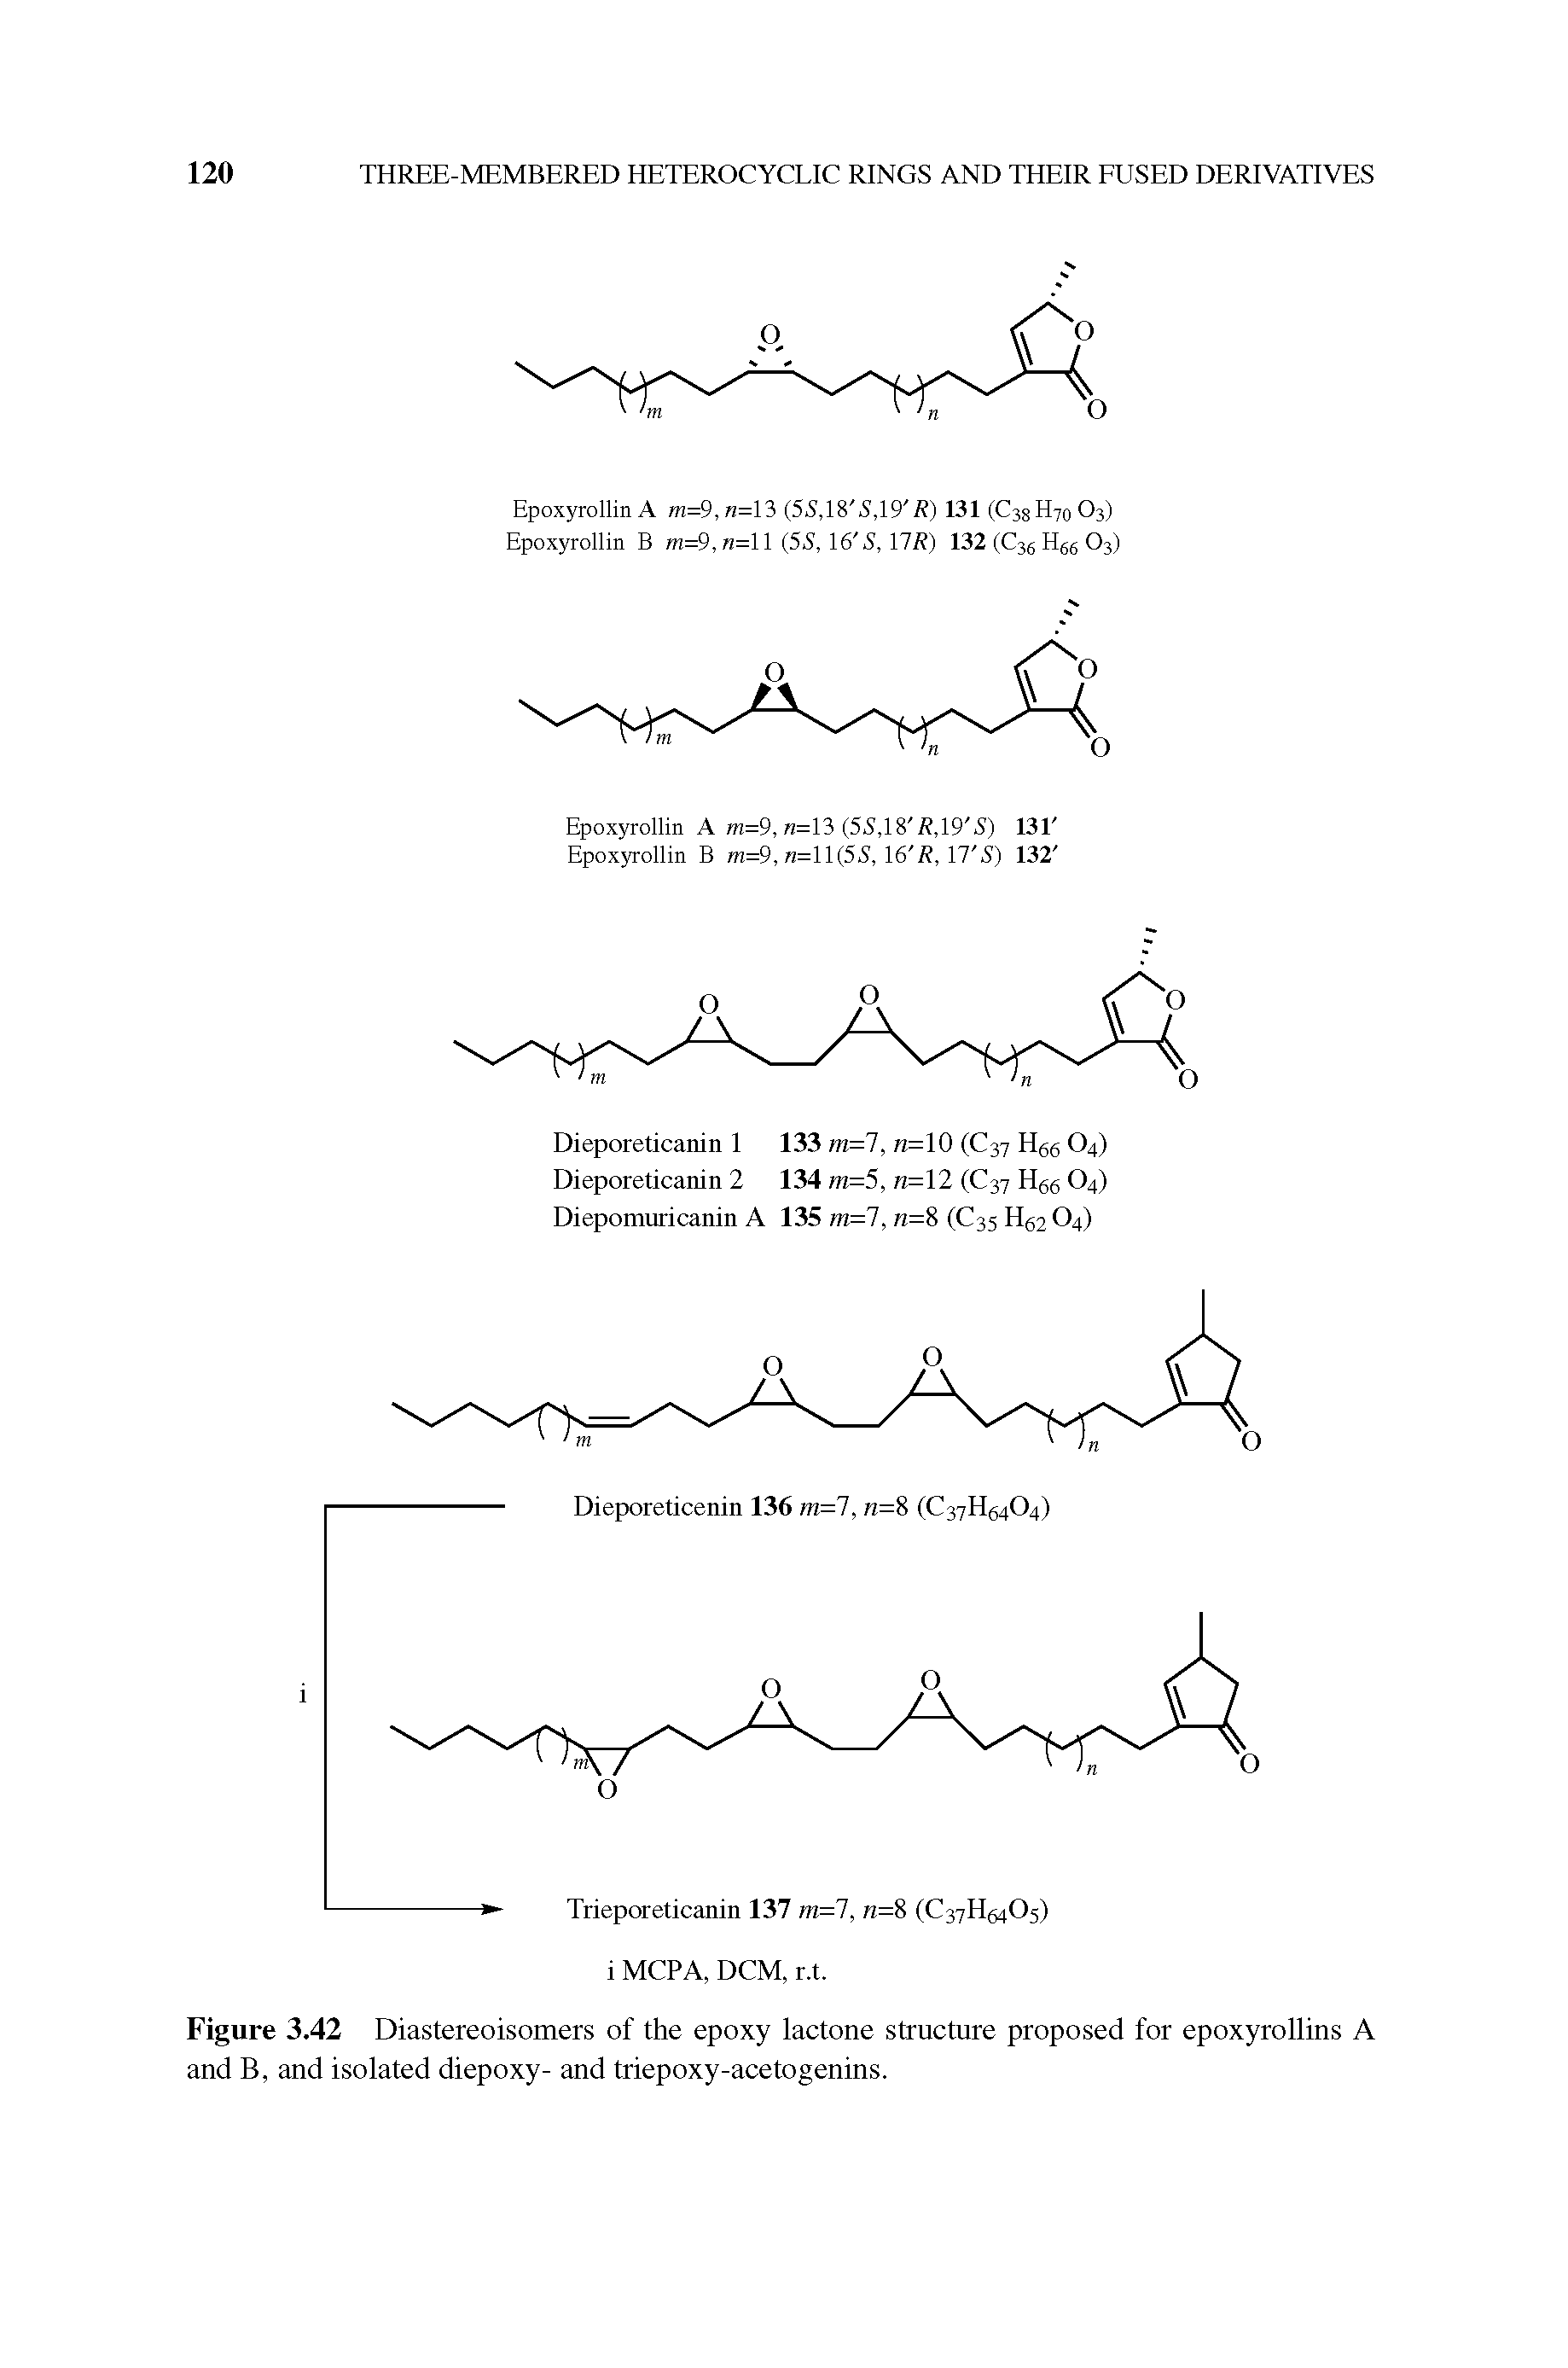 Figure 3.42 Diastereoisomers of the epoxy lactone structure proposed for epoxyrollins A and B, and isolated diepoxy- and triepoxy-acetogenins.